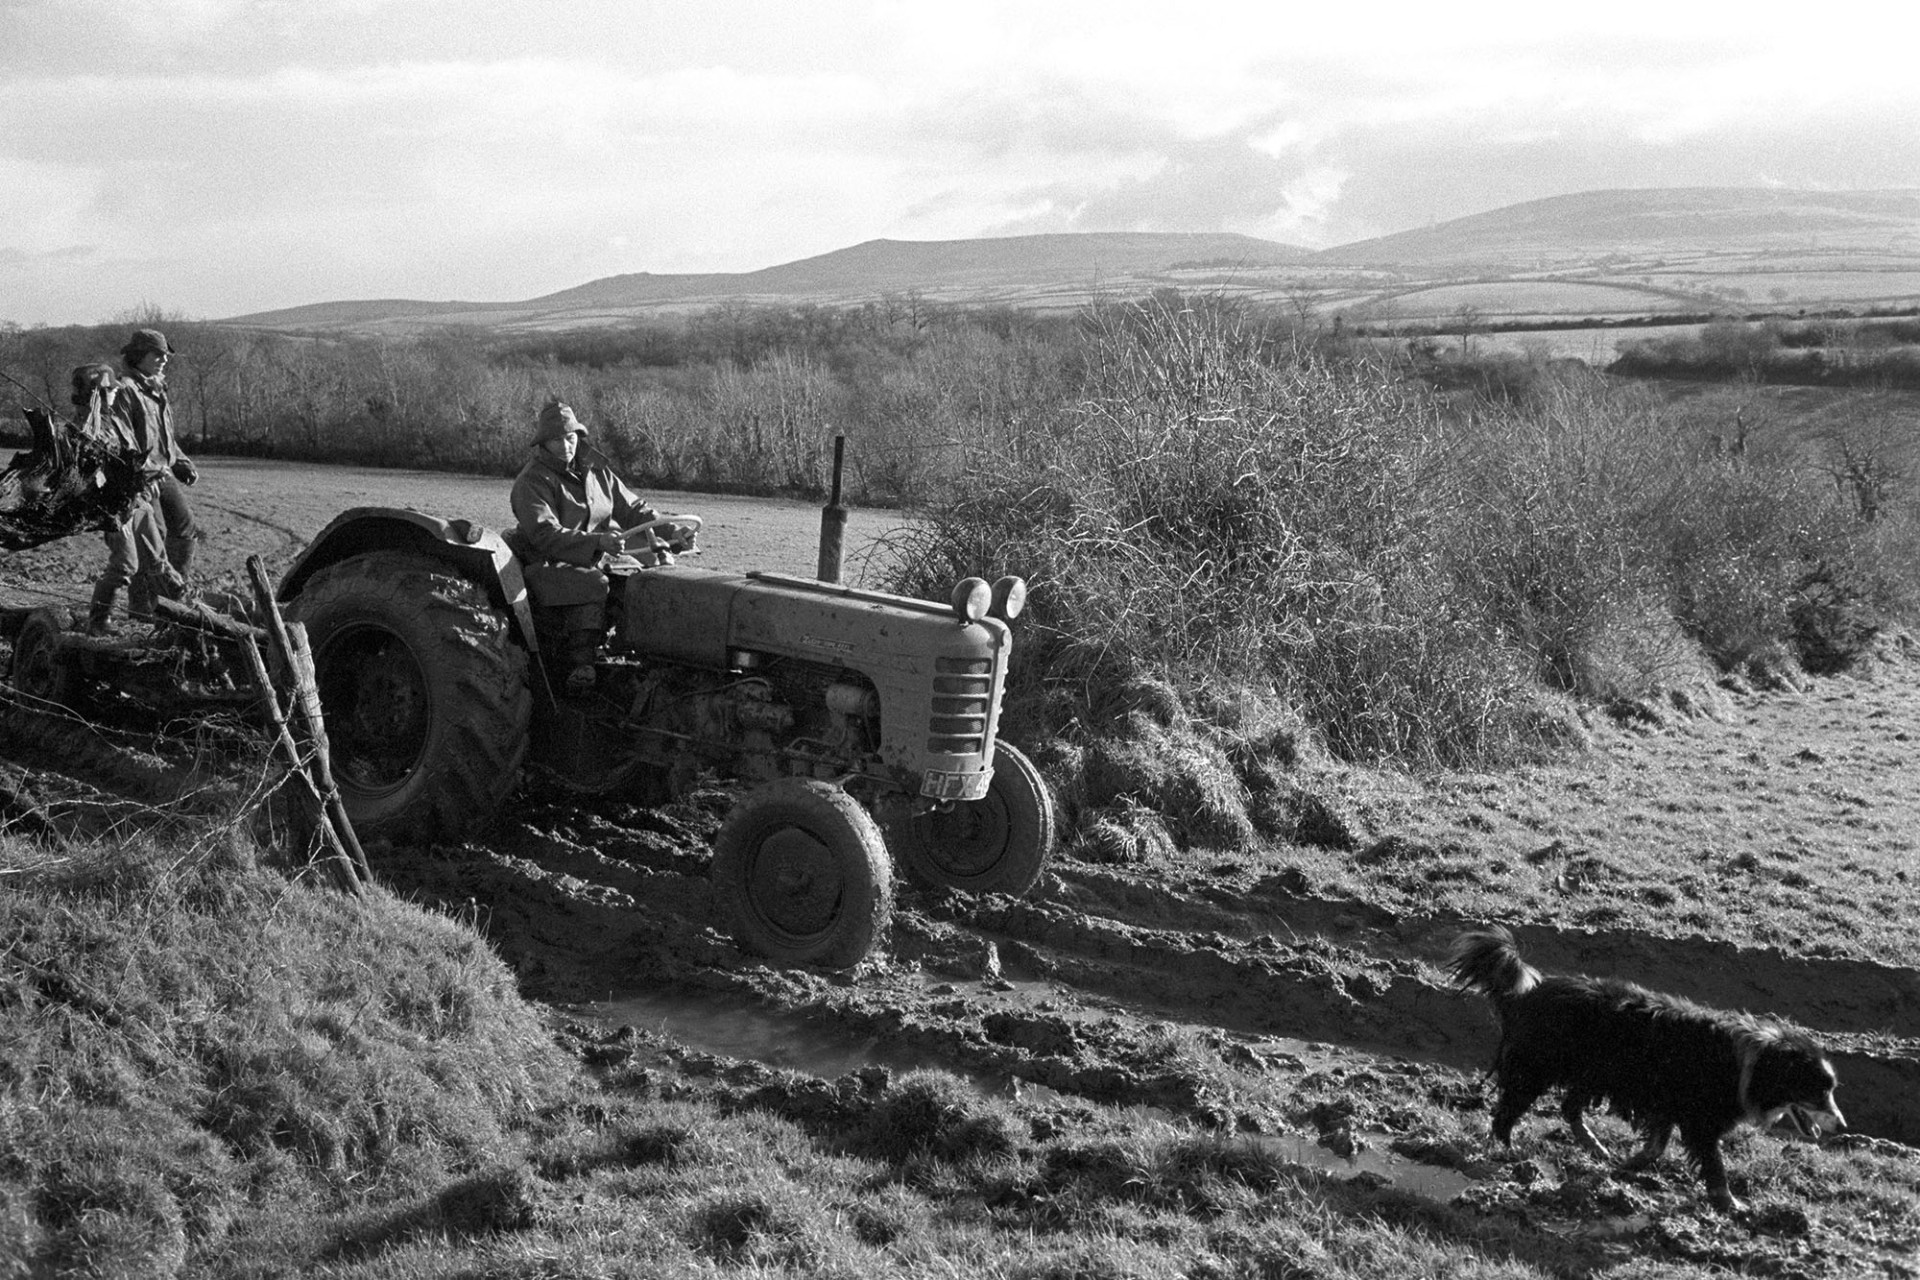 Farmer driving tractor, muddy track with dog, Dartmoor behind.
[Mr Simmons driving a tractor into a field with two boys riding on the trailer, at Lower Hewton Farm, Okehampton.]